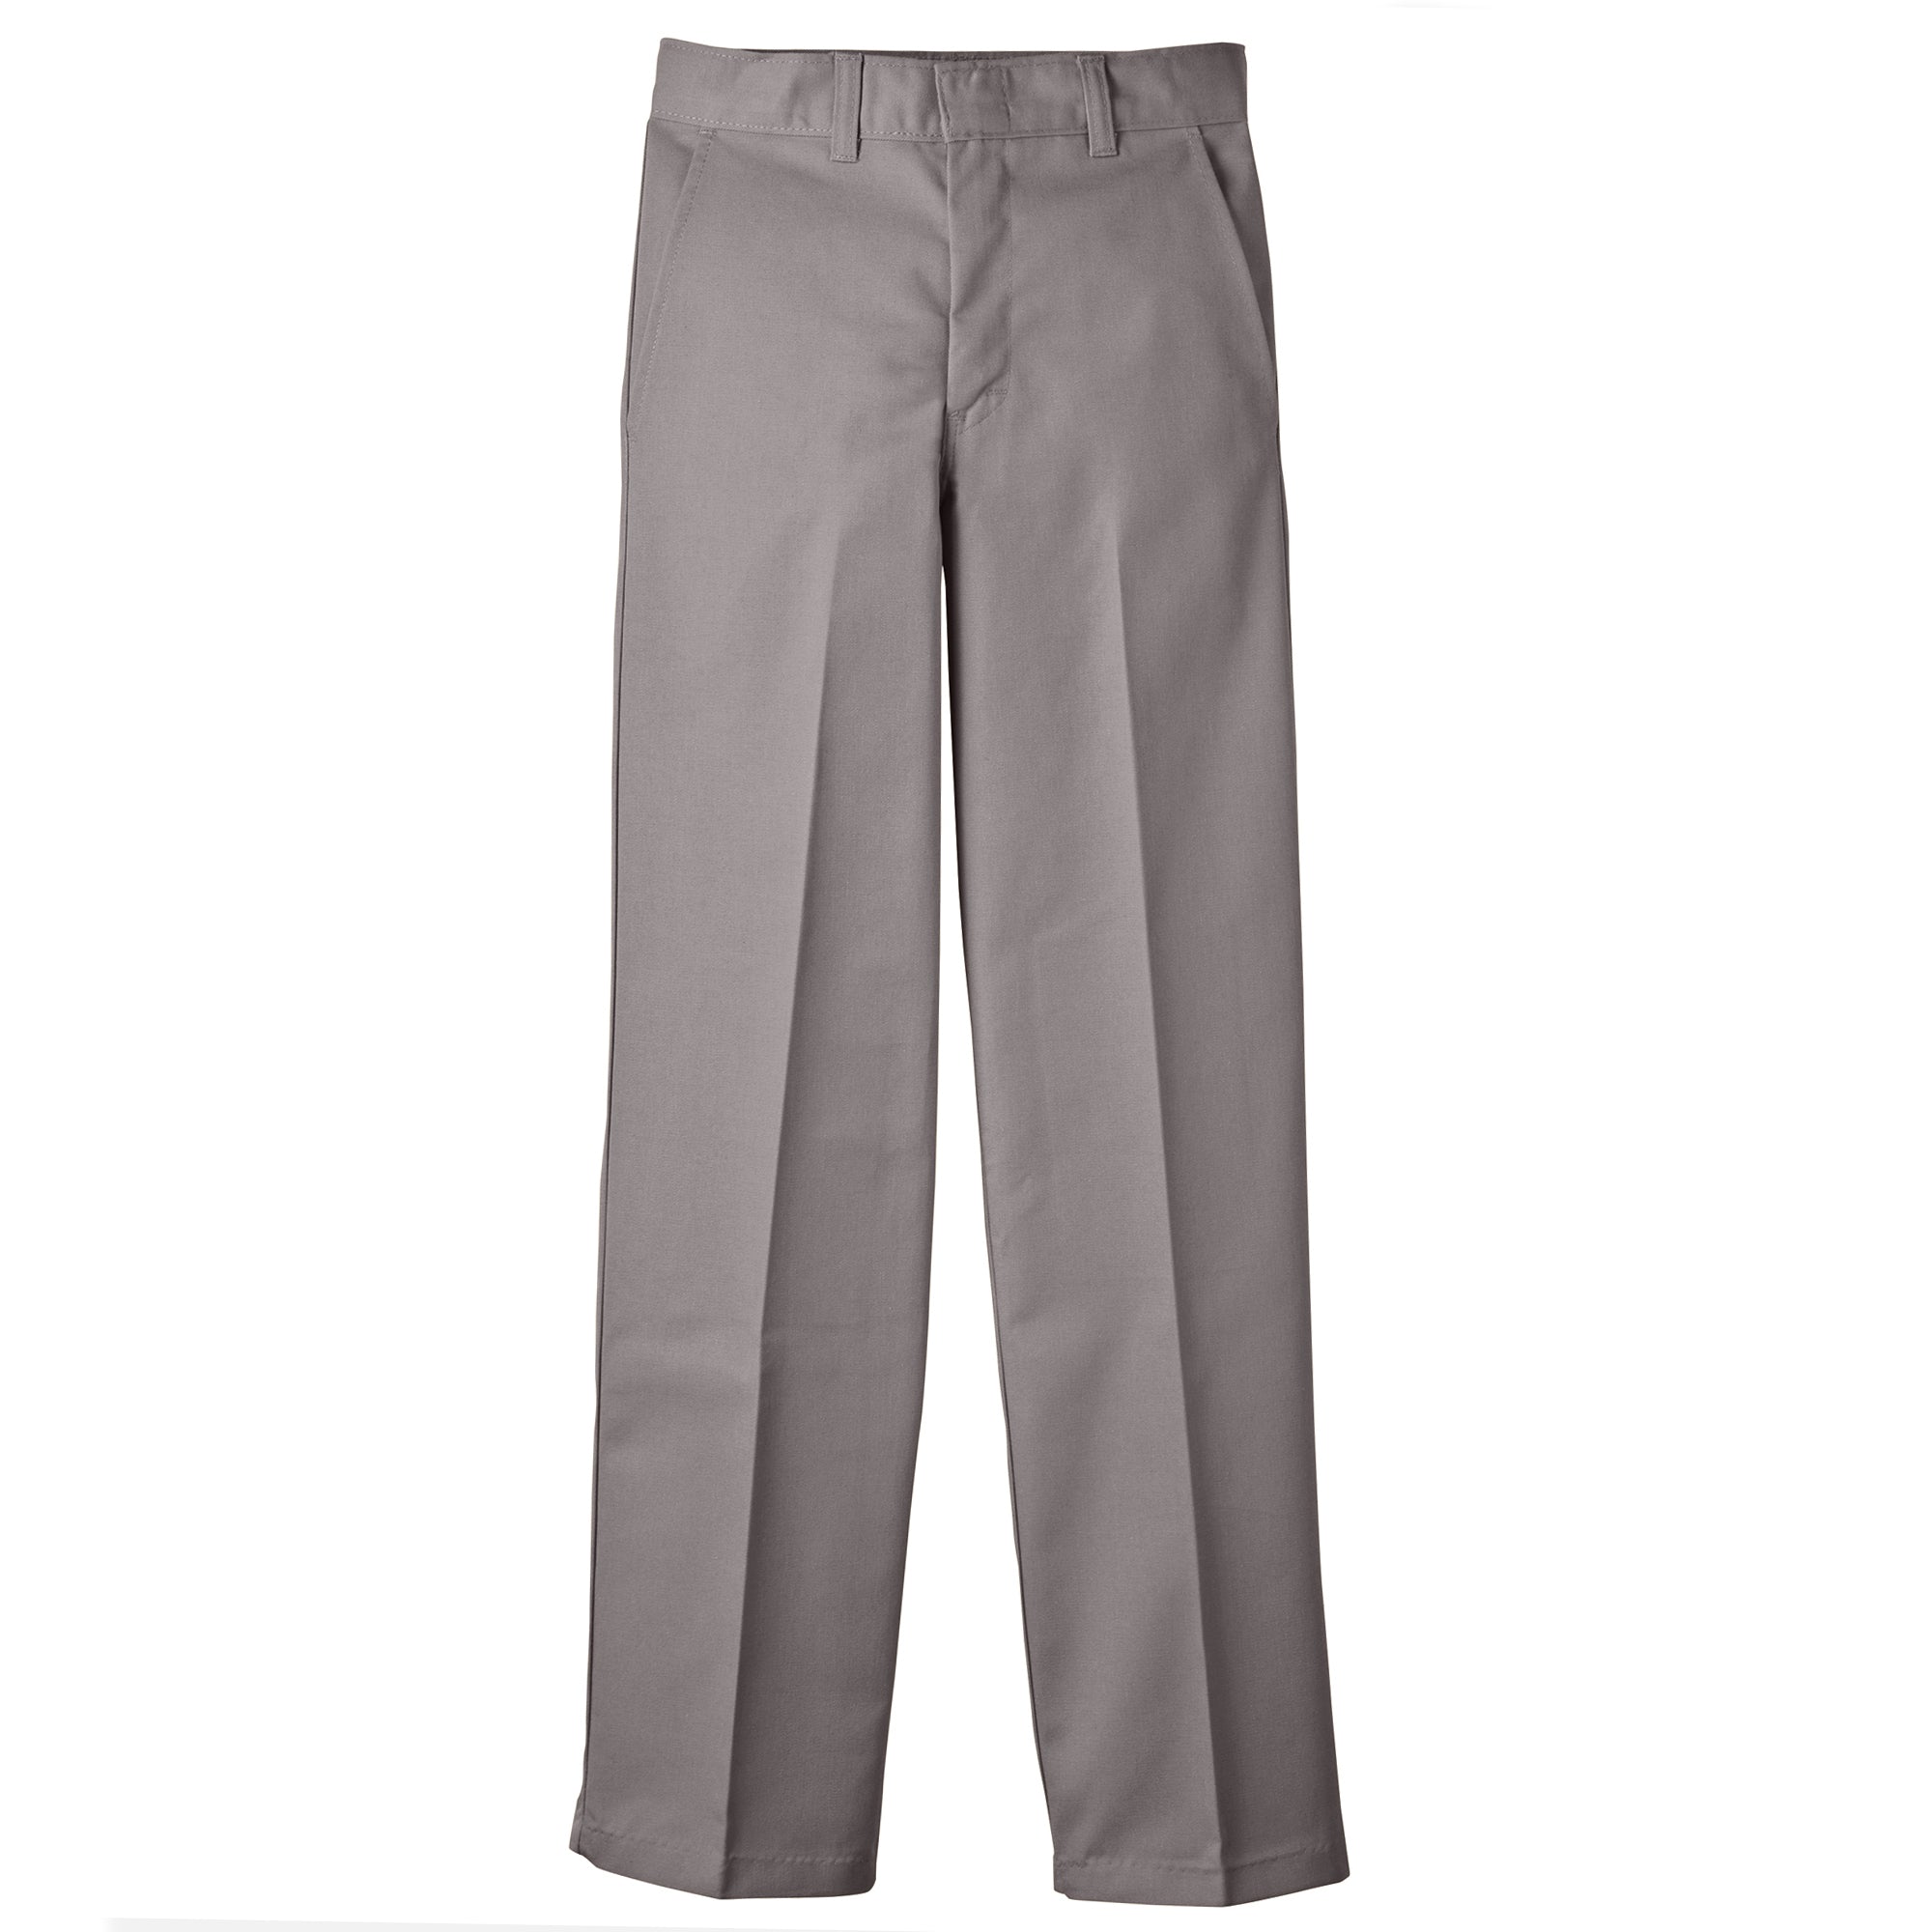 Silver Grey Dickies Boys Classic Fit Pants